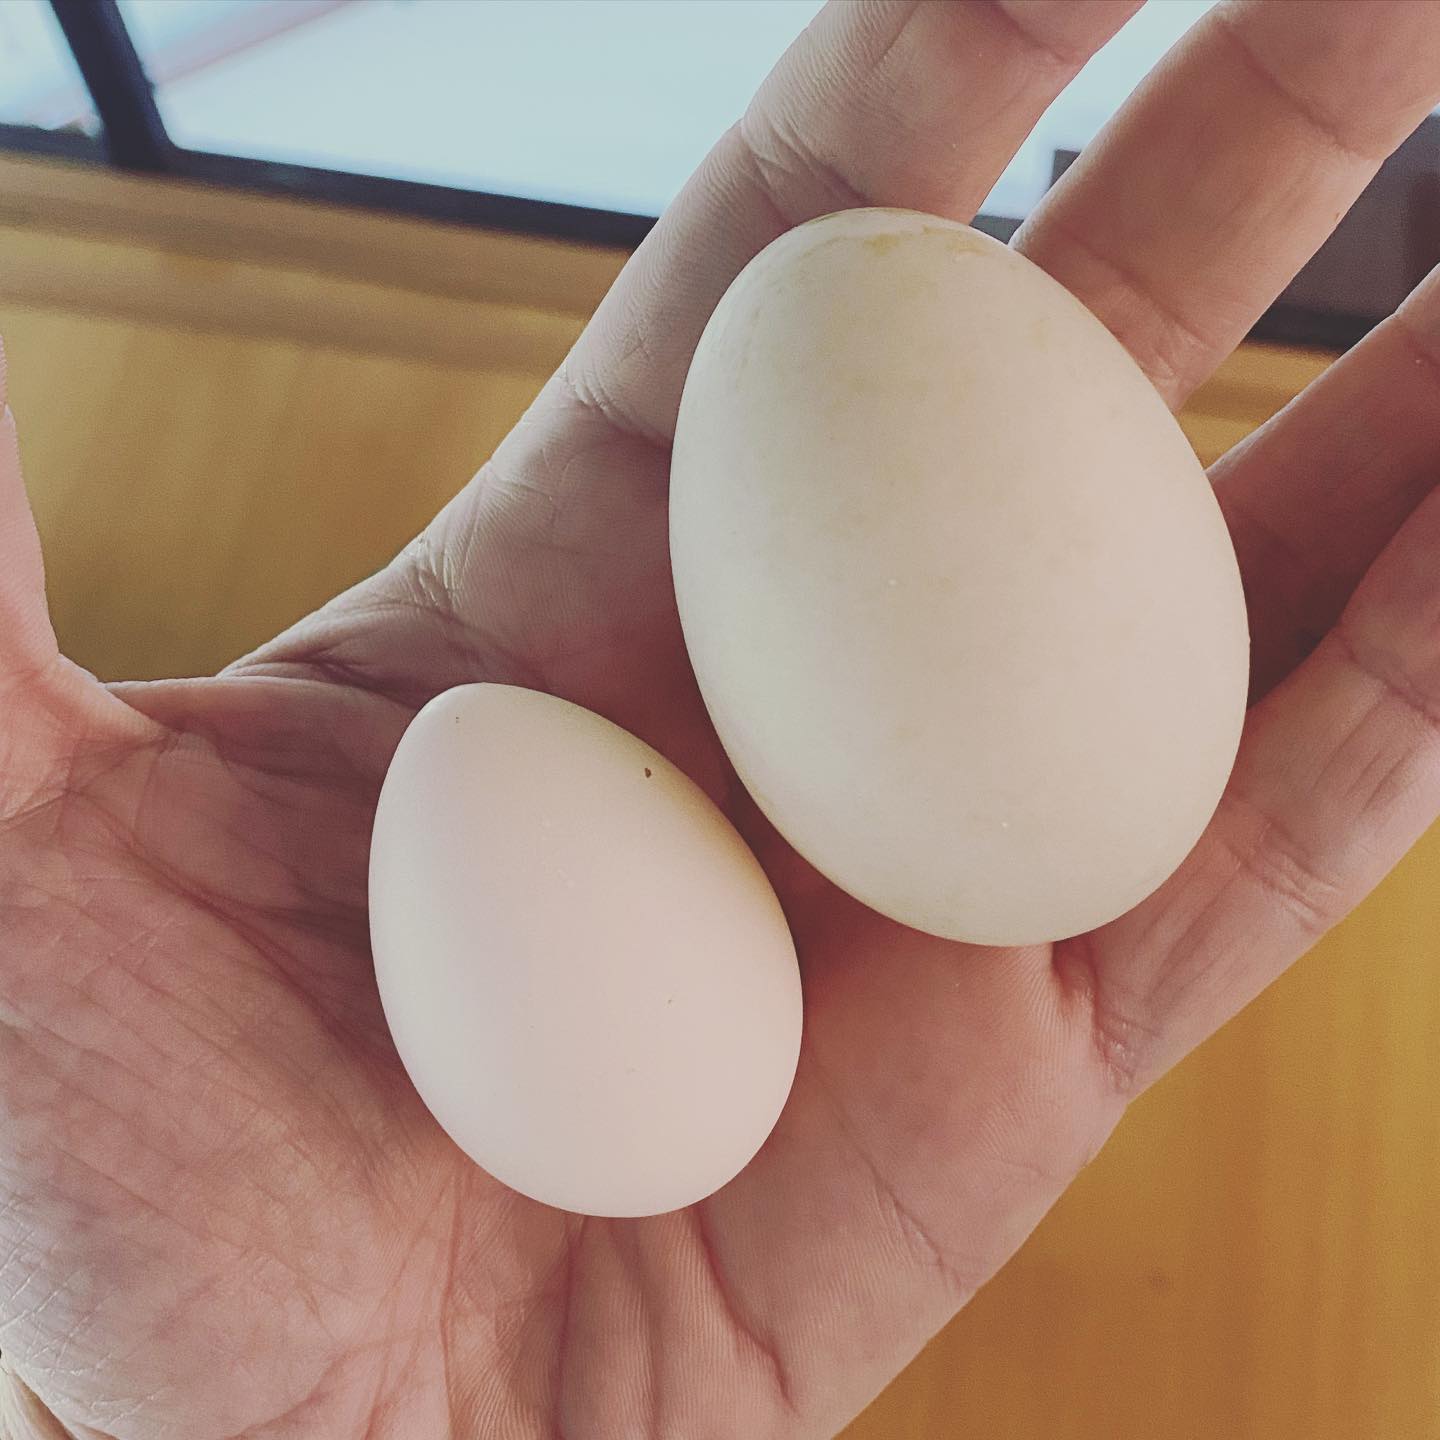 New day, new type of egg 🥚!! My Madeira chickens started to lay as well, such tiny eggs